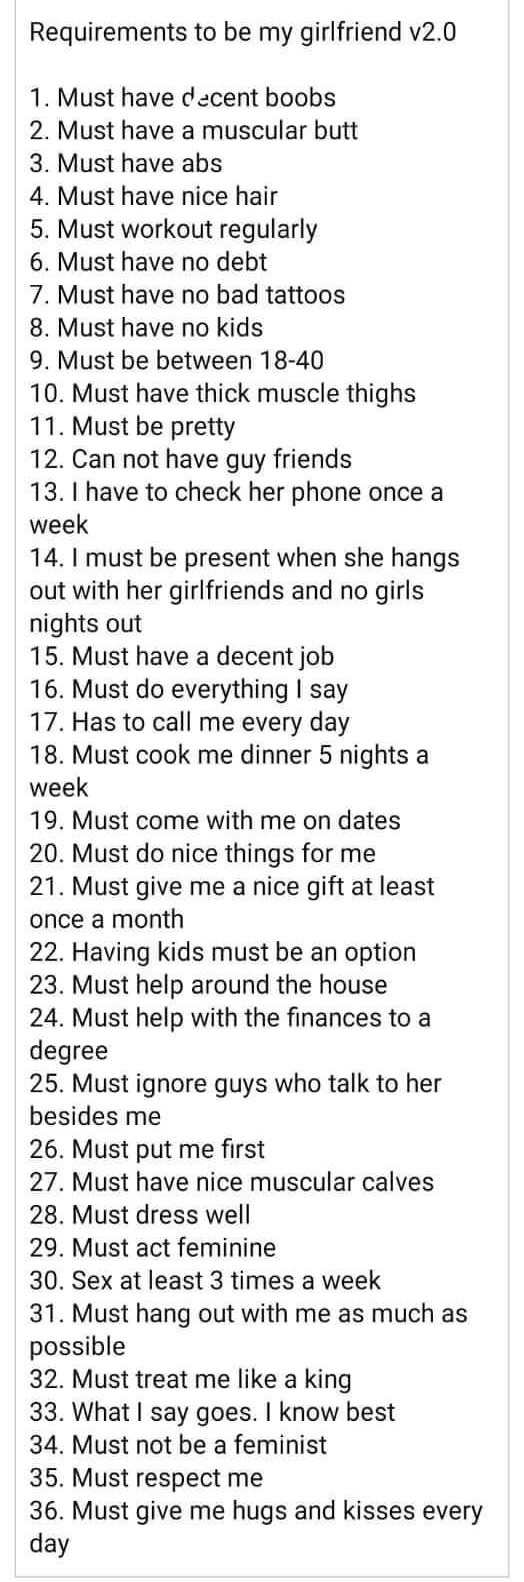 super entitled people - requirements for my girlfriend - Requirements to be my girlfriend v2.0 1. Must have decent boobs 2. Must have a muscular butt 3. Must have abs 4. Must have nice hair 5. Must workout regularly 6. Must have no debt 7. Must have no ba